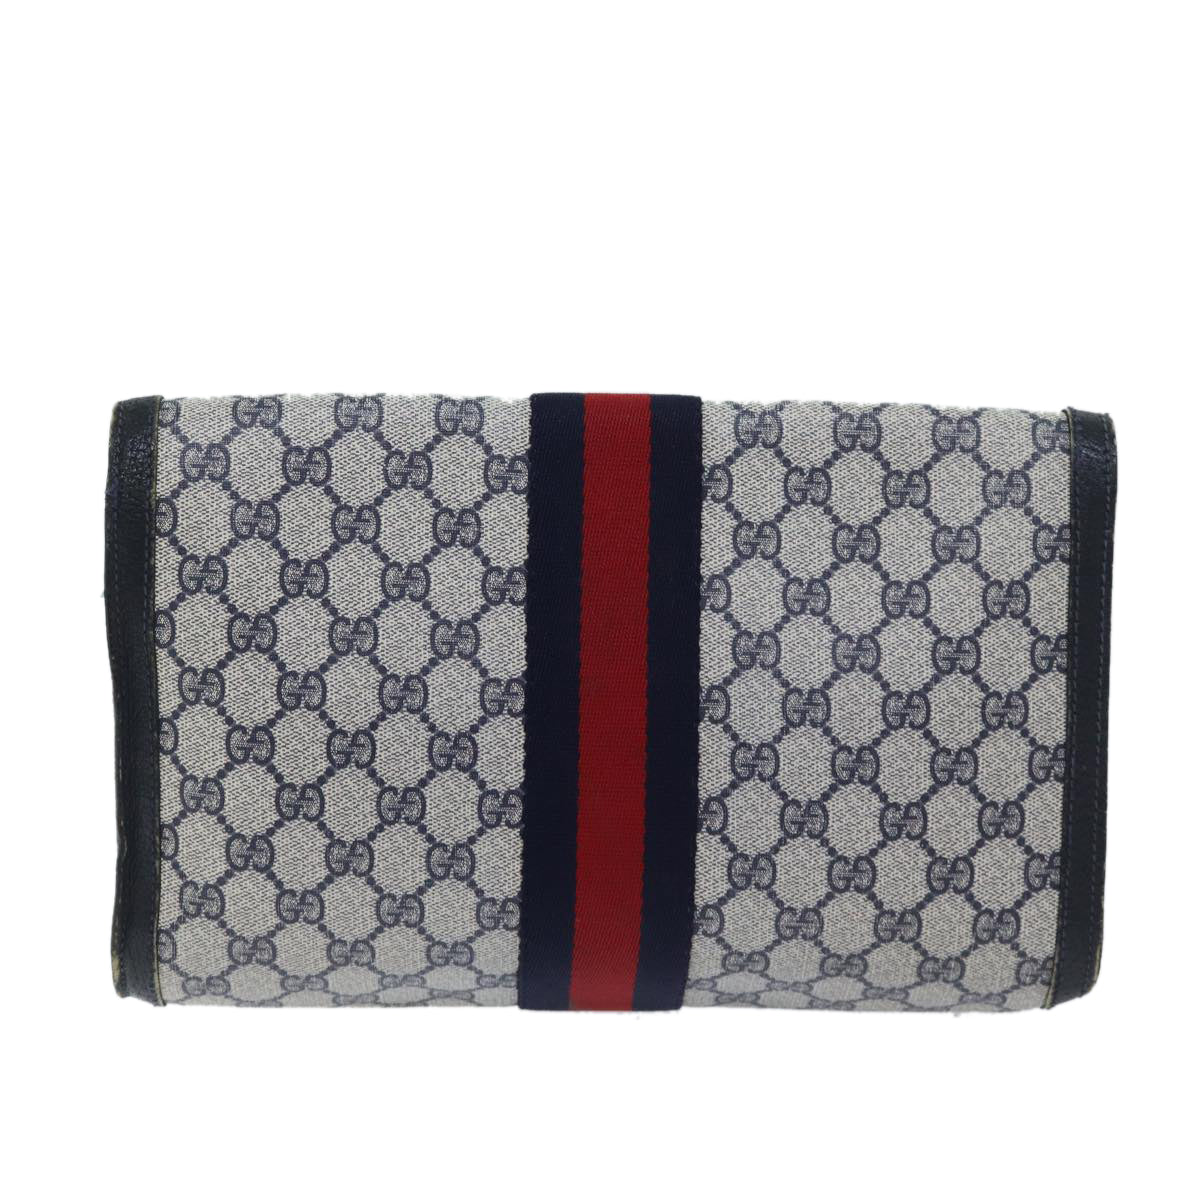 GUCCI GG Supreme Sherry Line Clutch Bag PVC Navy Red 89 01 007 Auth yk11471 - 0